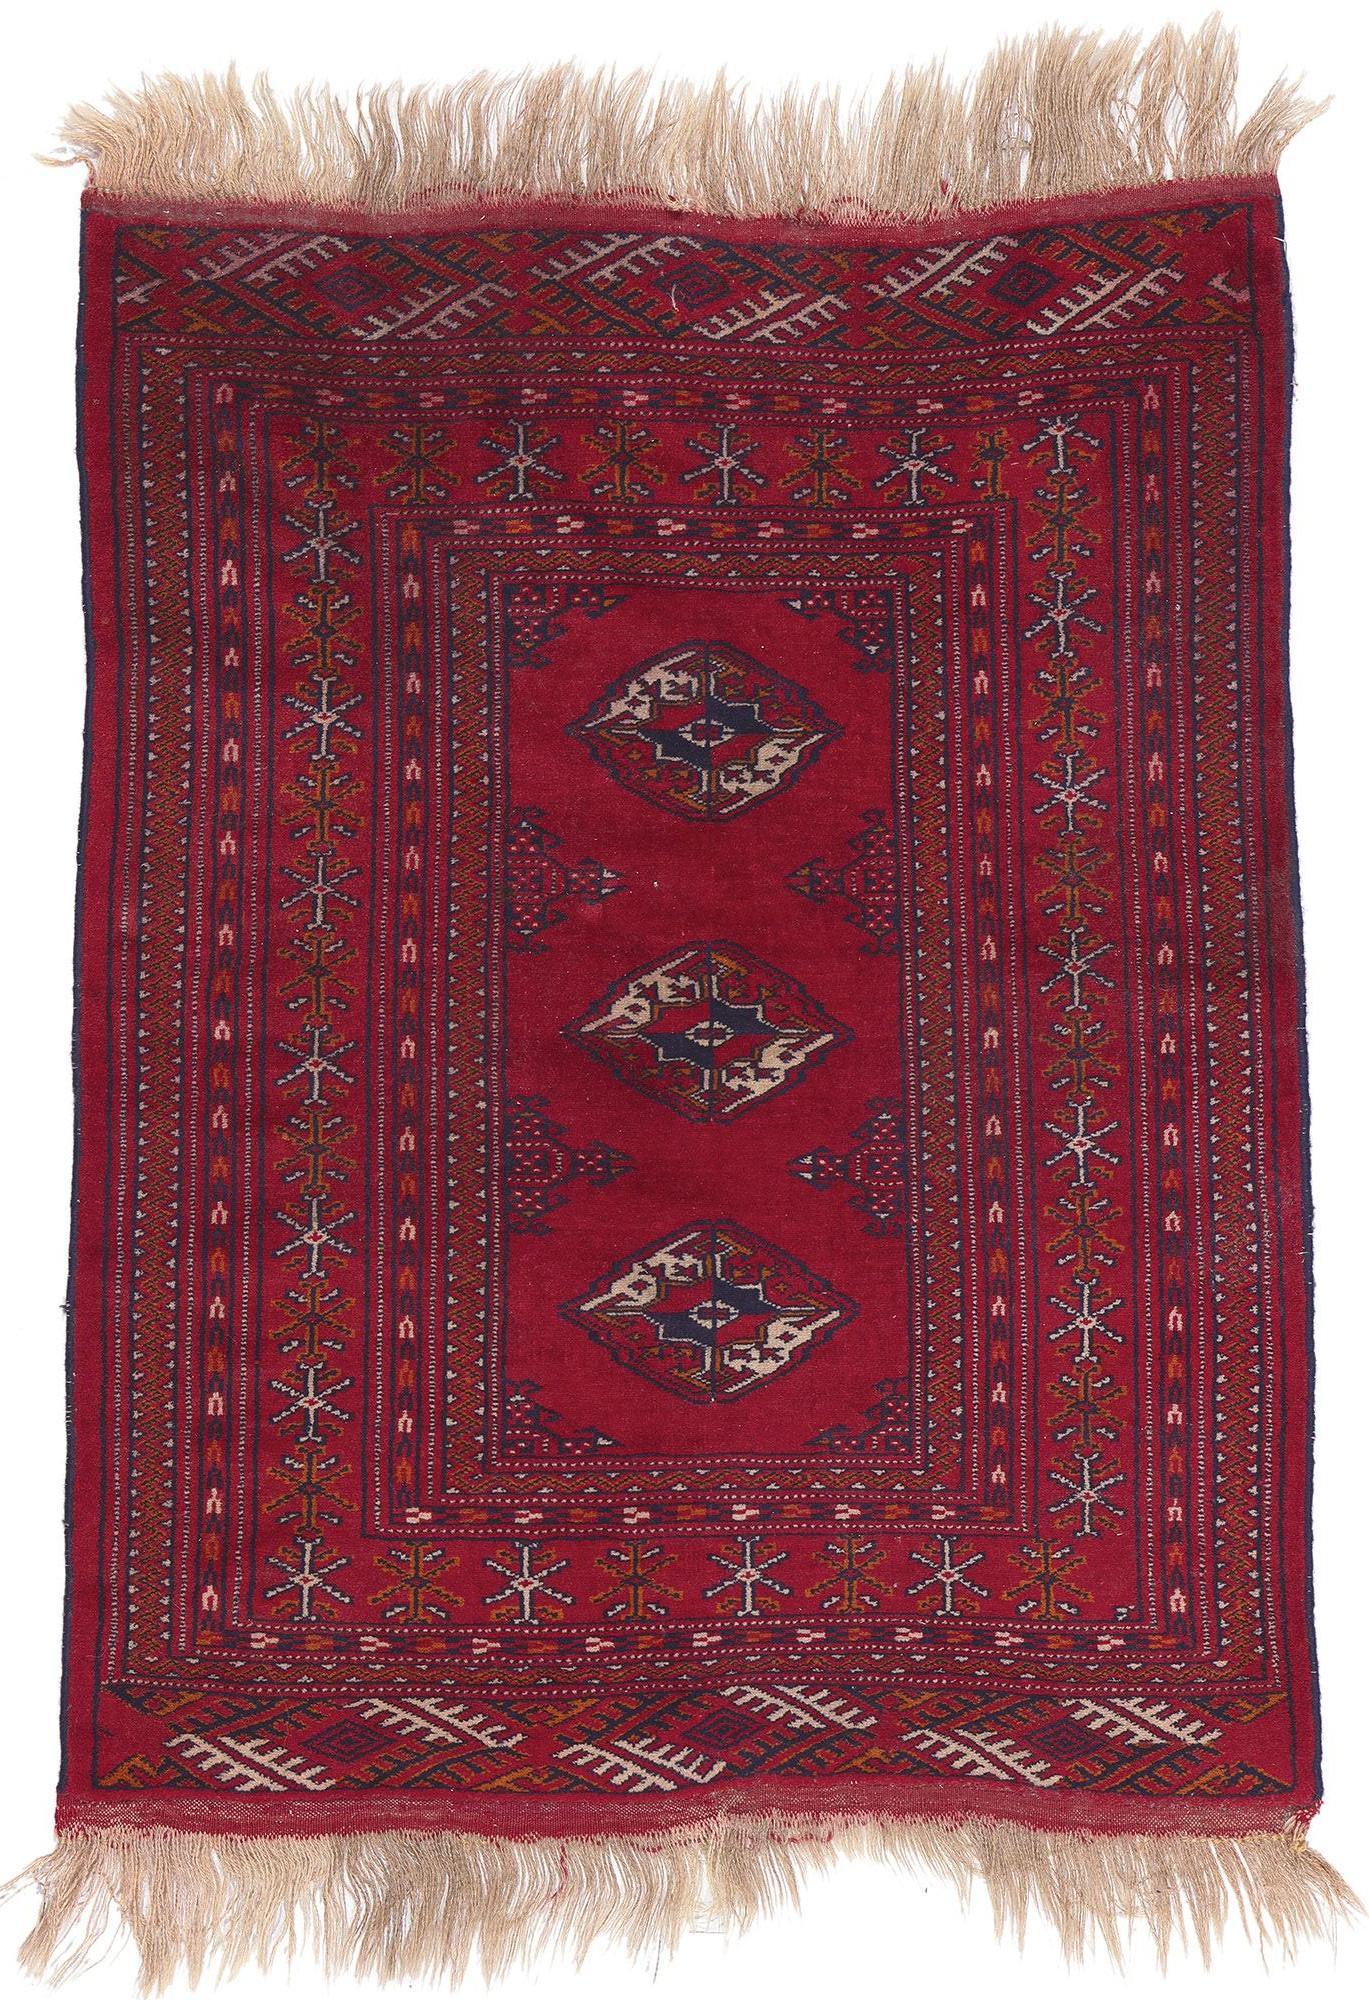 Vintage Persian Turkoman Rug, Dark and Moody Nomad Meets Tribal Enchantment For Sale